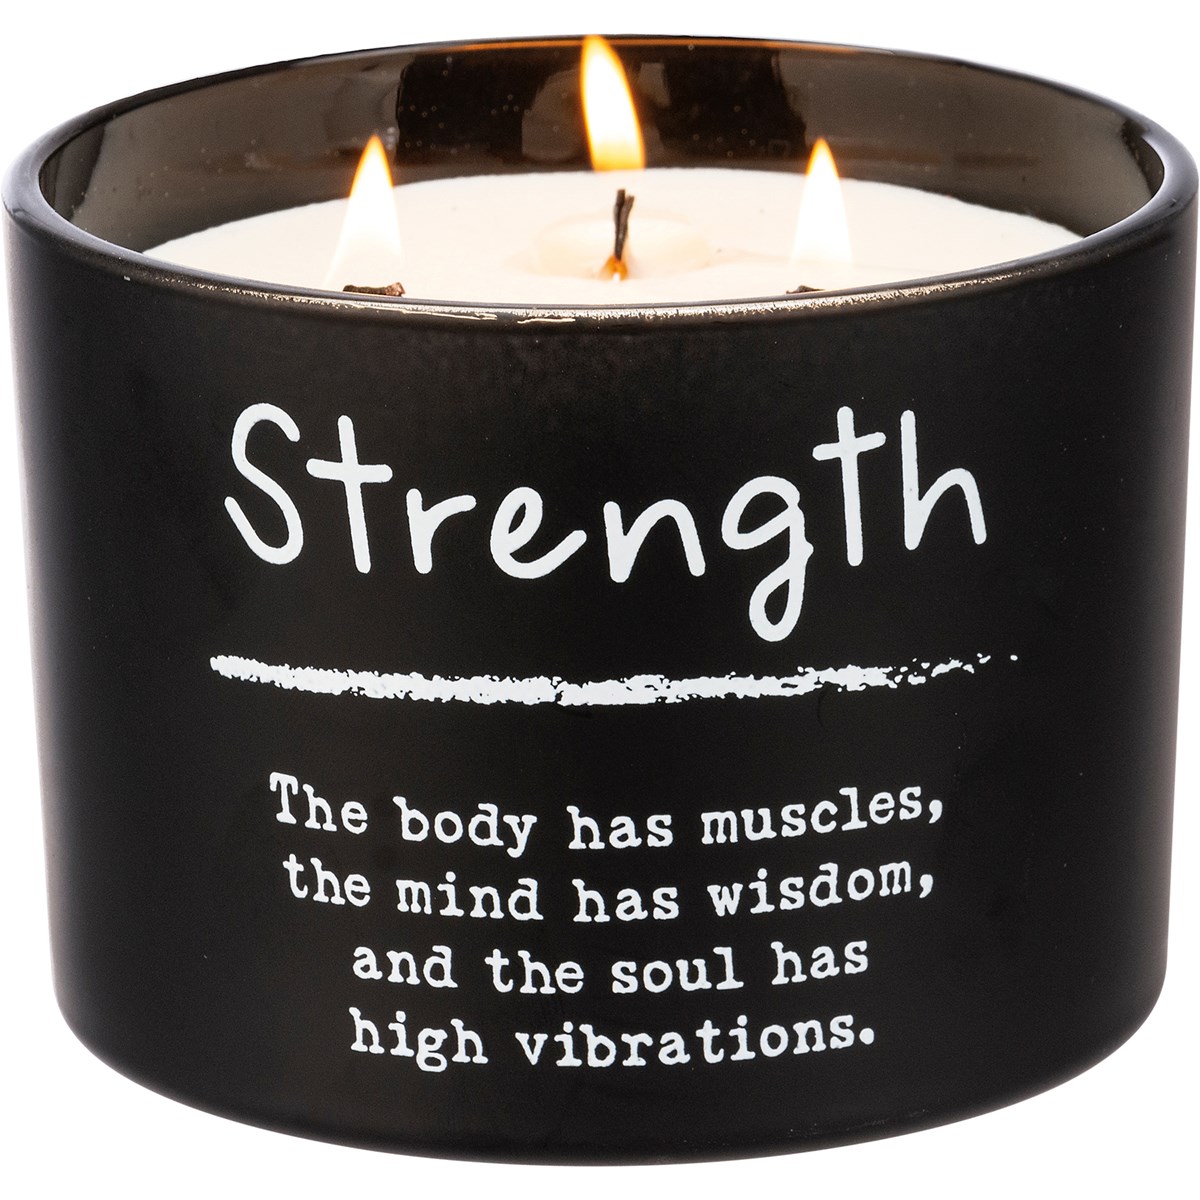 Strength Candle - Soy Wax, Glass, Wood